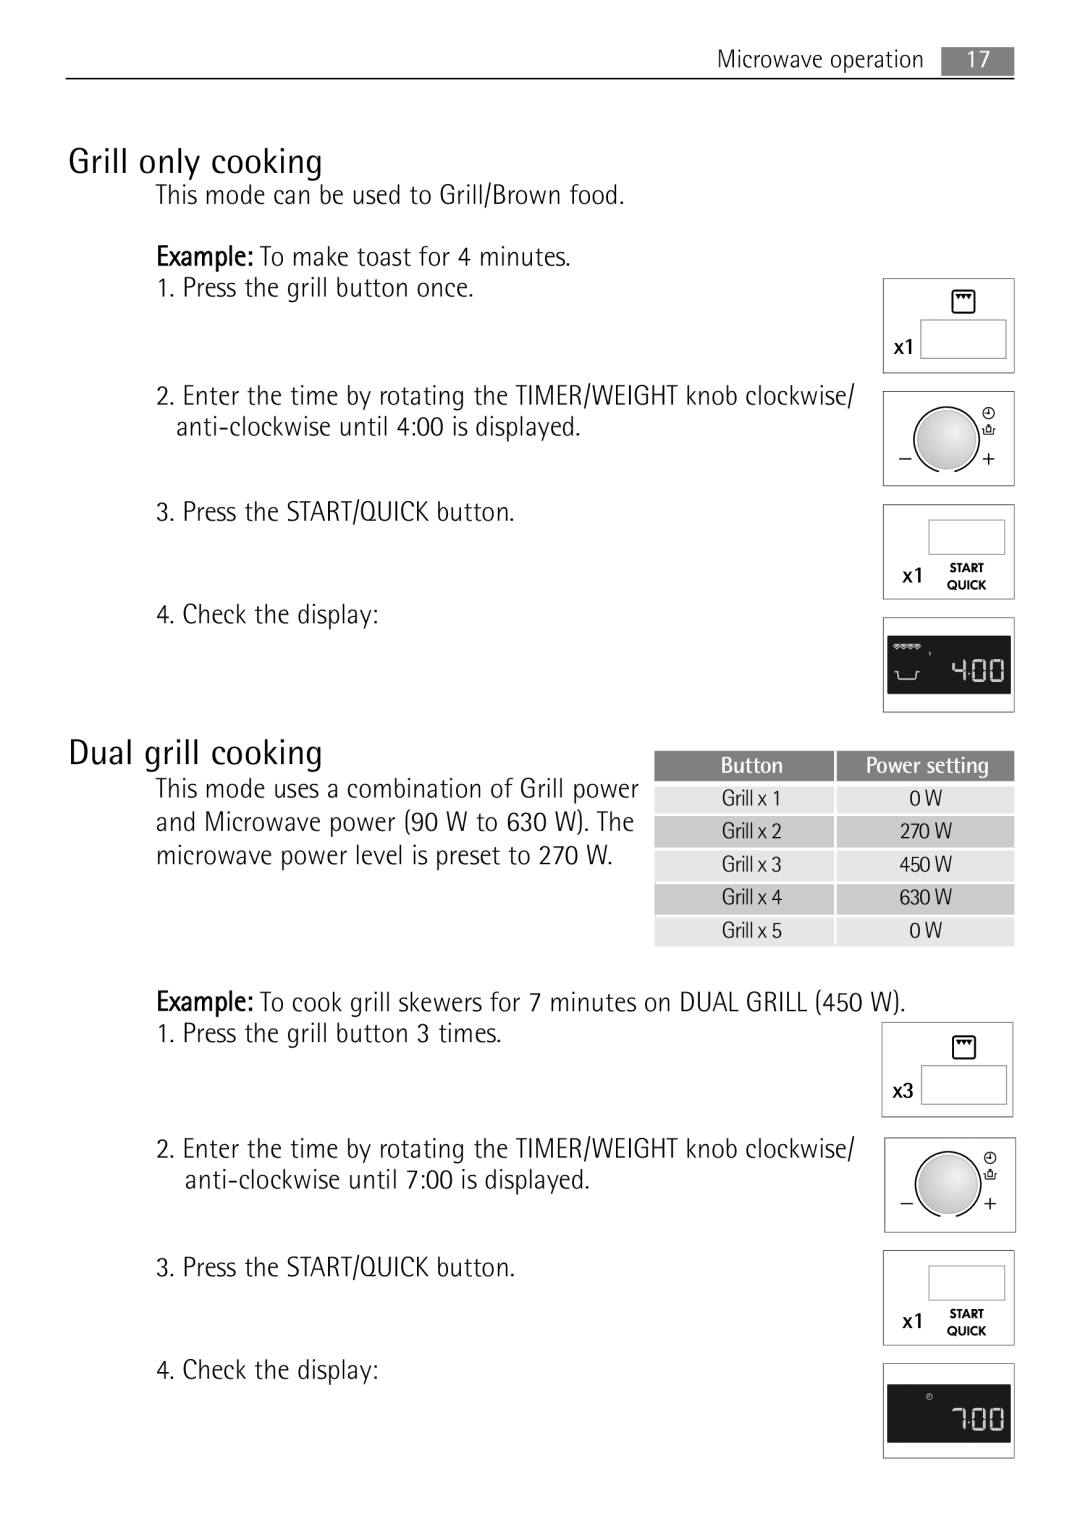 AEG MCD2662E user manual Grill only cooking, Dual grill cooking 